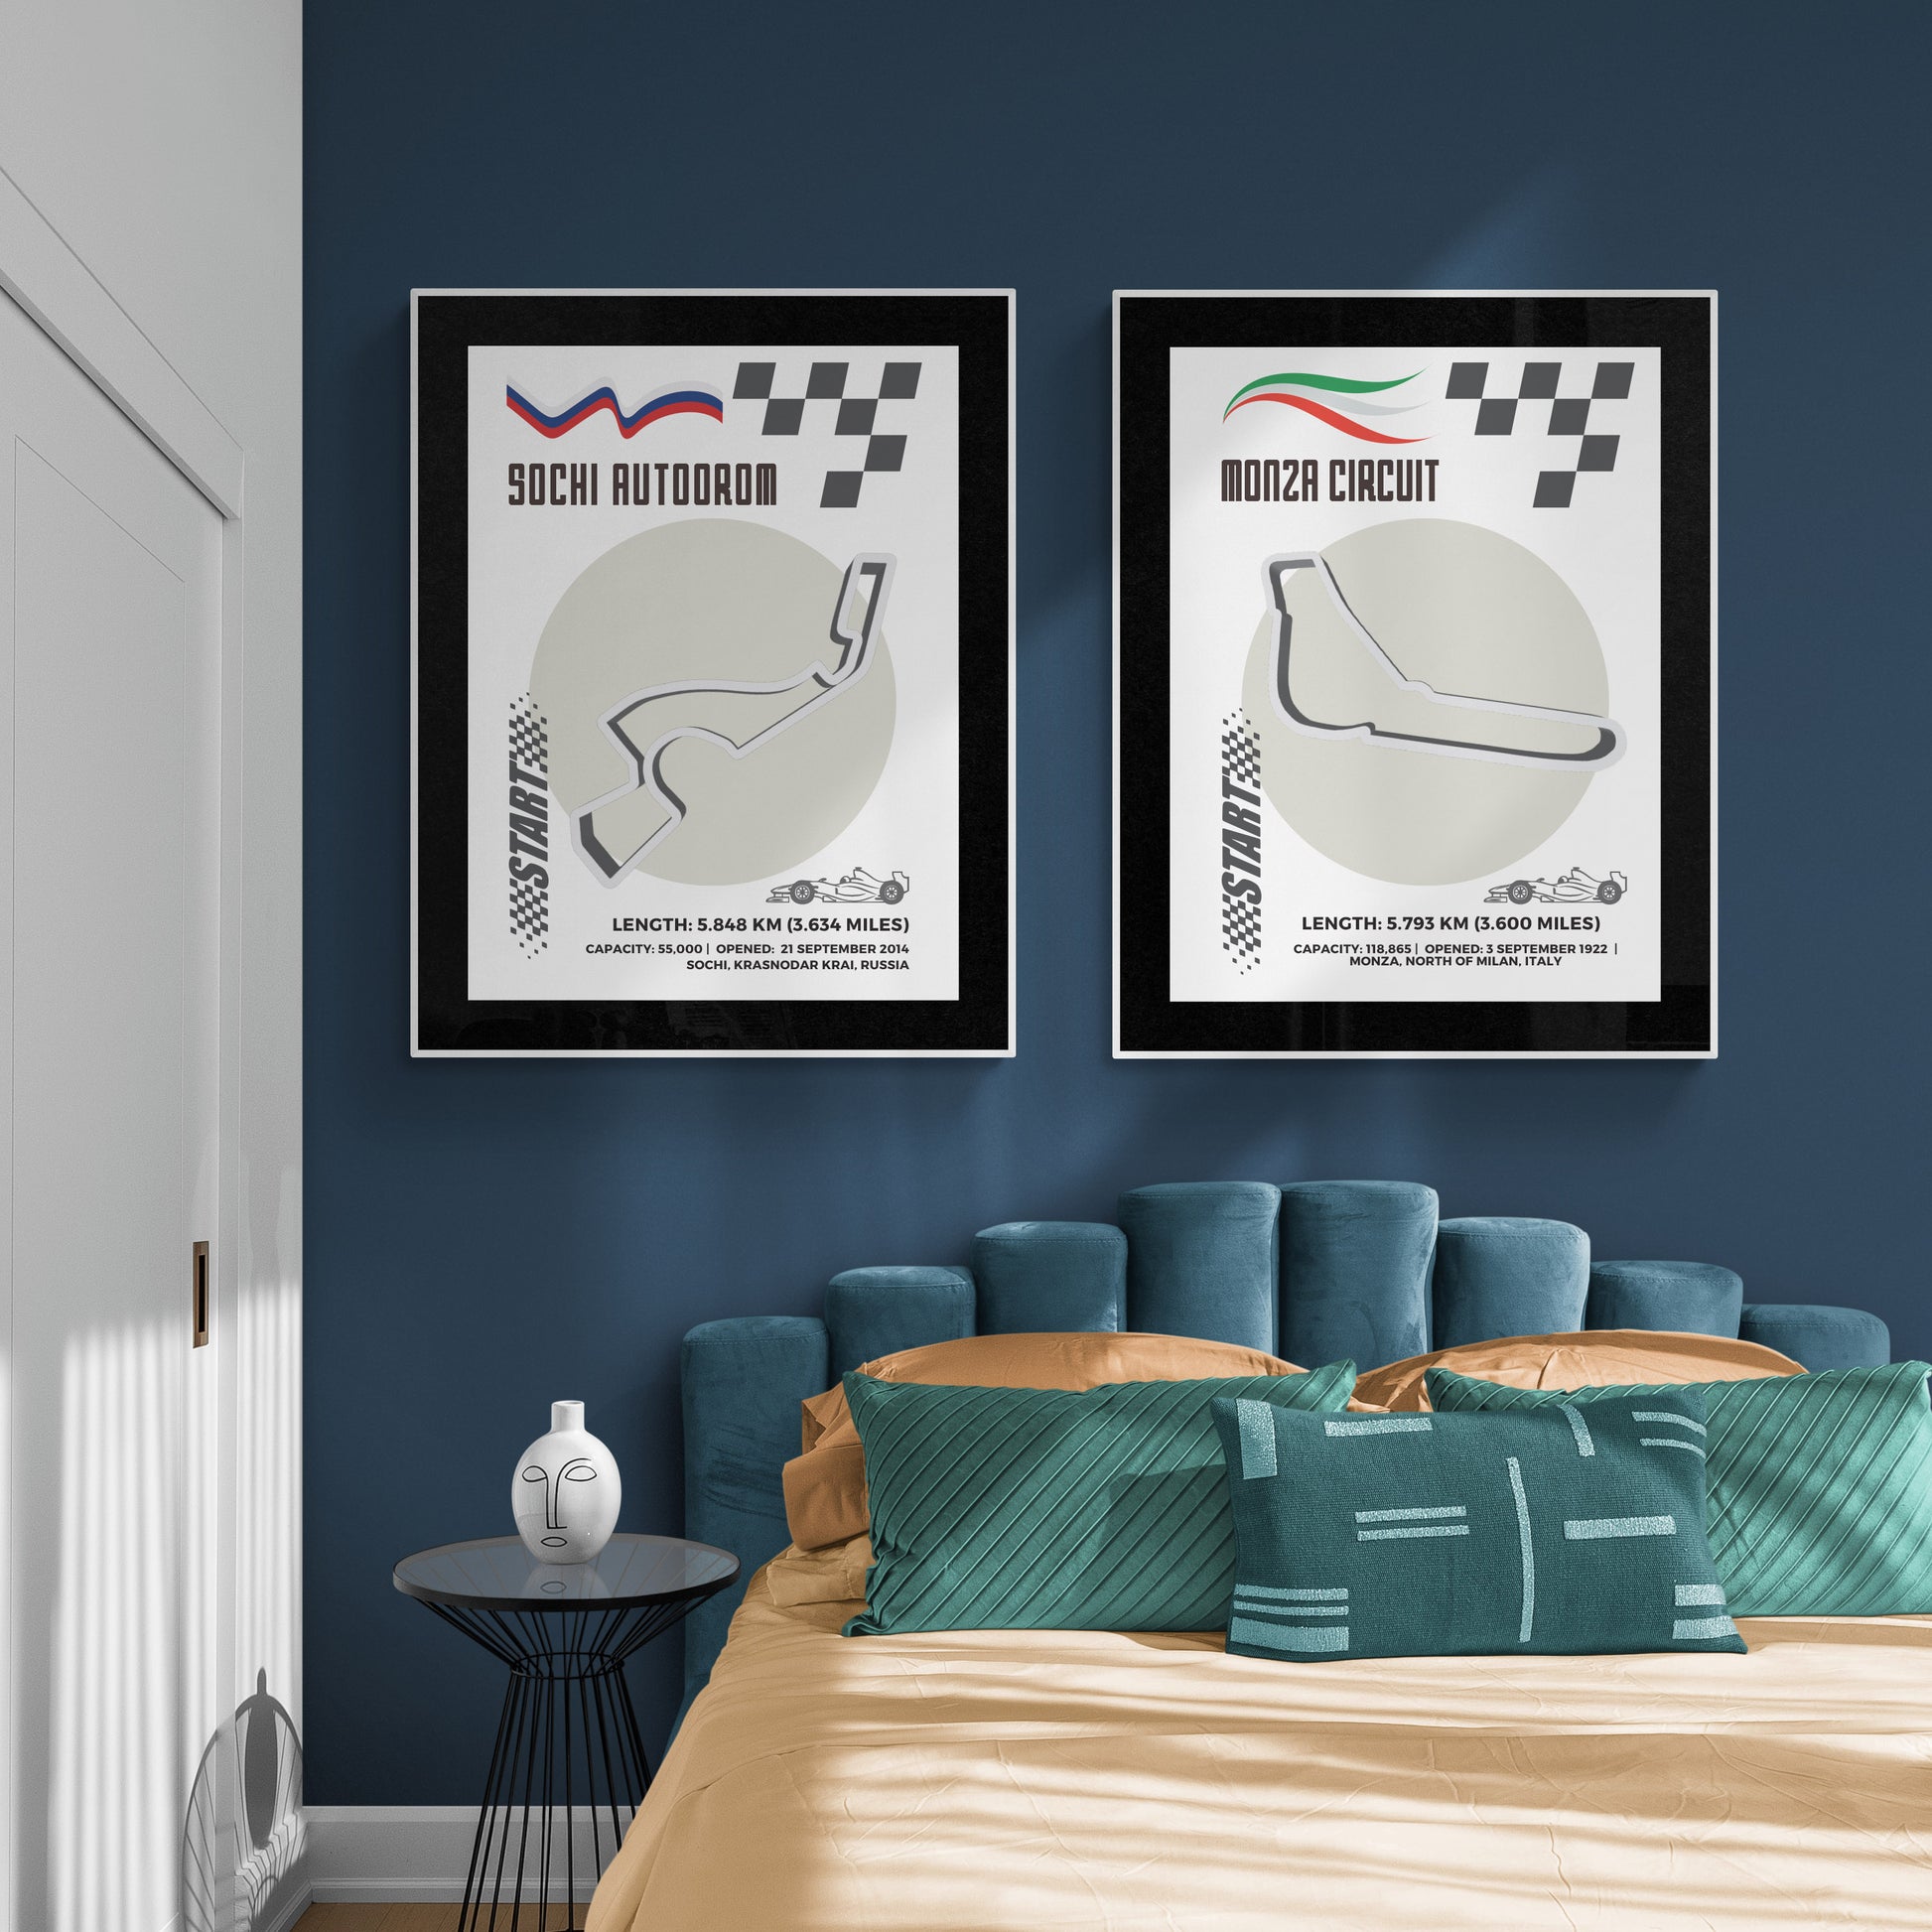 Experience the thrill of Formula One with our Istanbul Circuit F1 Posters. Made with premium, age-resistant paper, each poster features a detailed map of the racing tracks, circuit guide, and historical information. Perfect for any Formula One fan, these posters are a must-have addition to your home decor collection. Complete the look with our "Formula One Poster" and showcase your love for the legendary Monza, iconic Monaco, or exhilarating Spa-Francorchamps